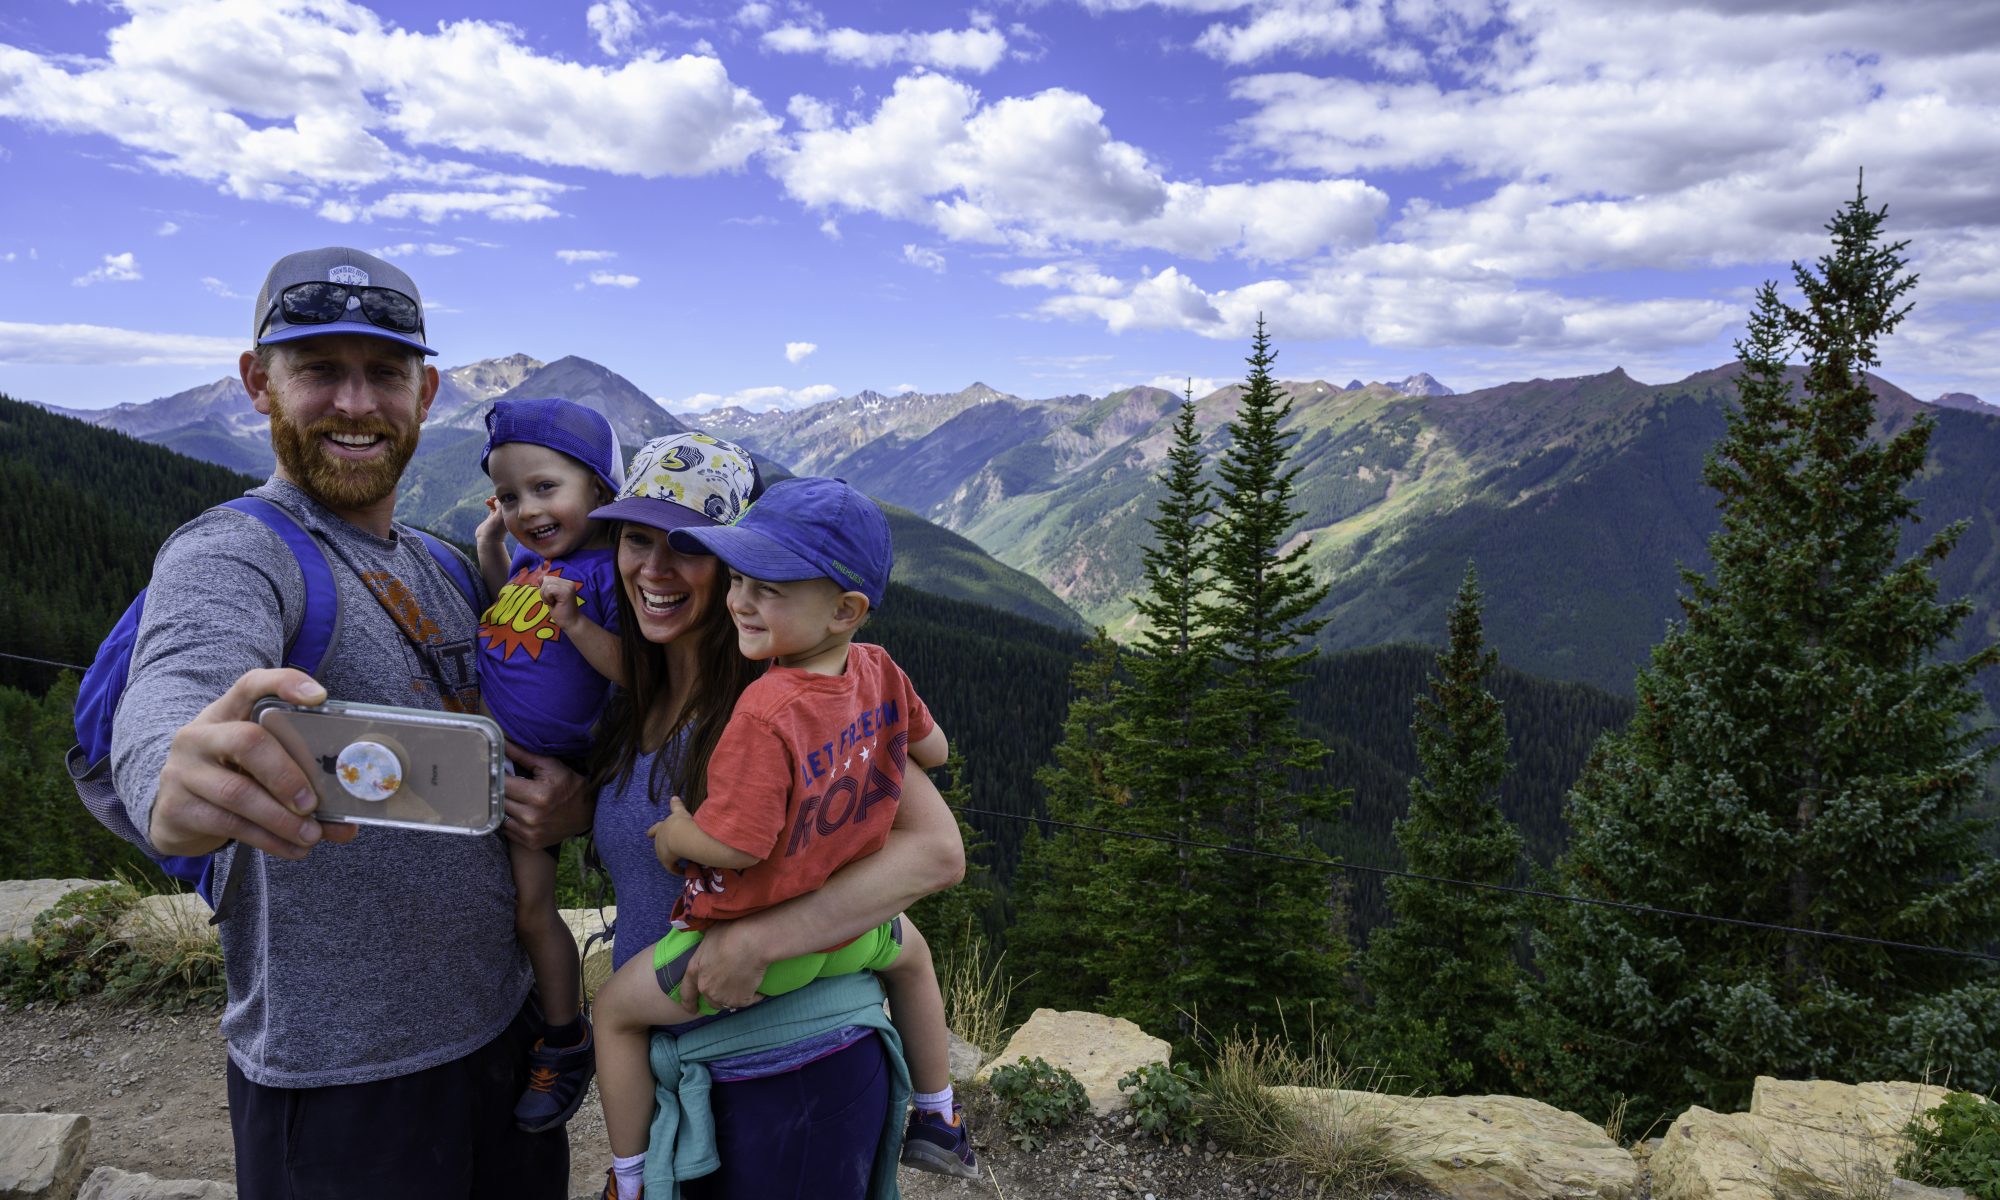 A family enjoying the outdoors in Aspen Mountain. Copyright: Aspen Skiing Company. Aspen Snowmass is opening for the Summer Season.